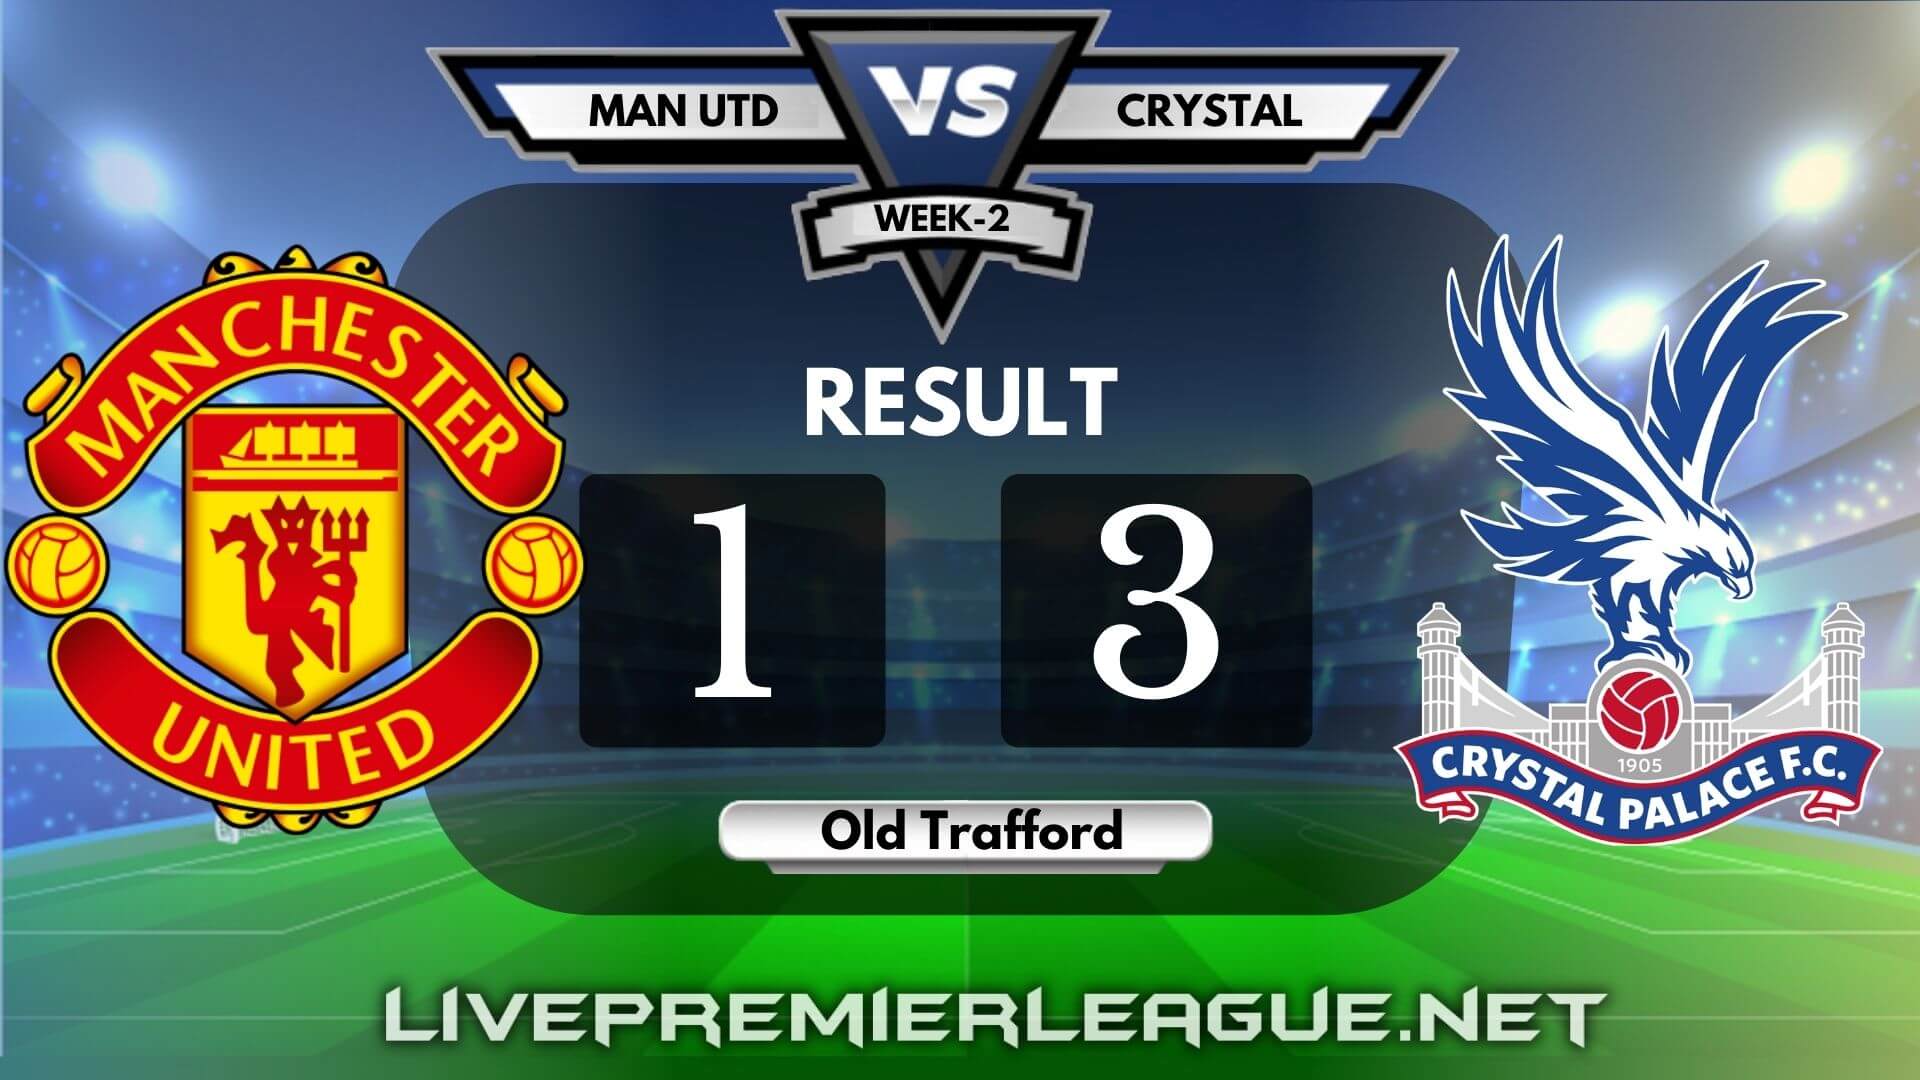 Manchester United Vs Crystal Palace | Week 2 Result 2020